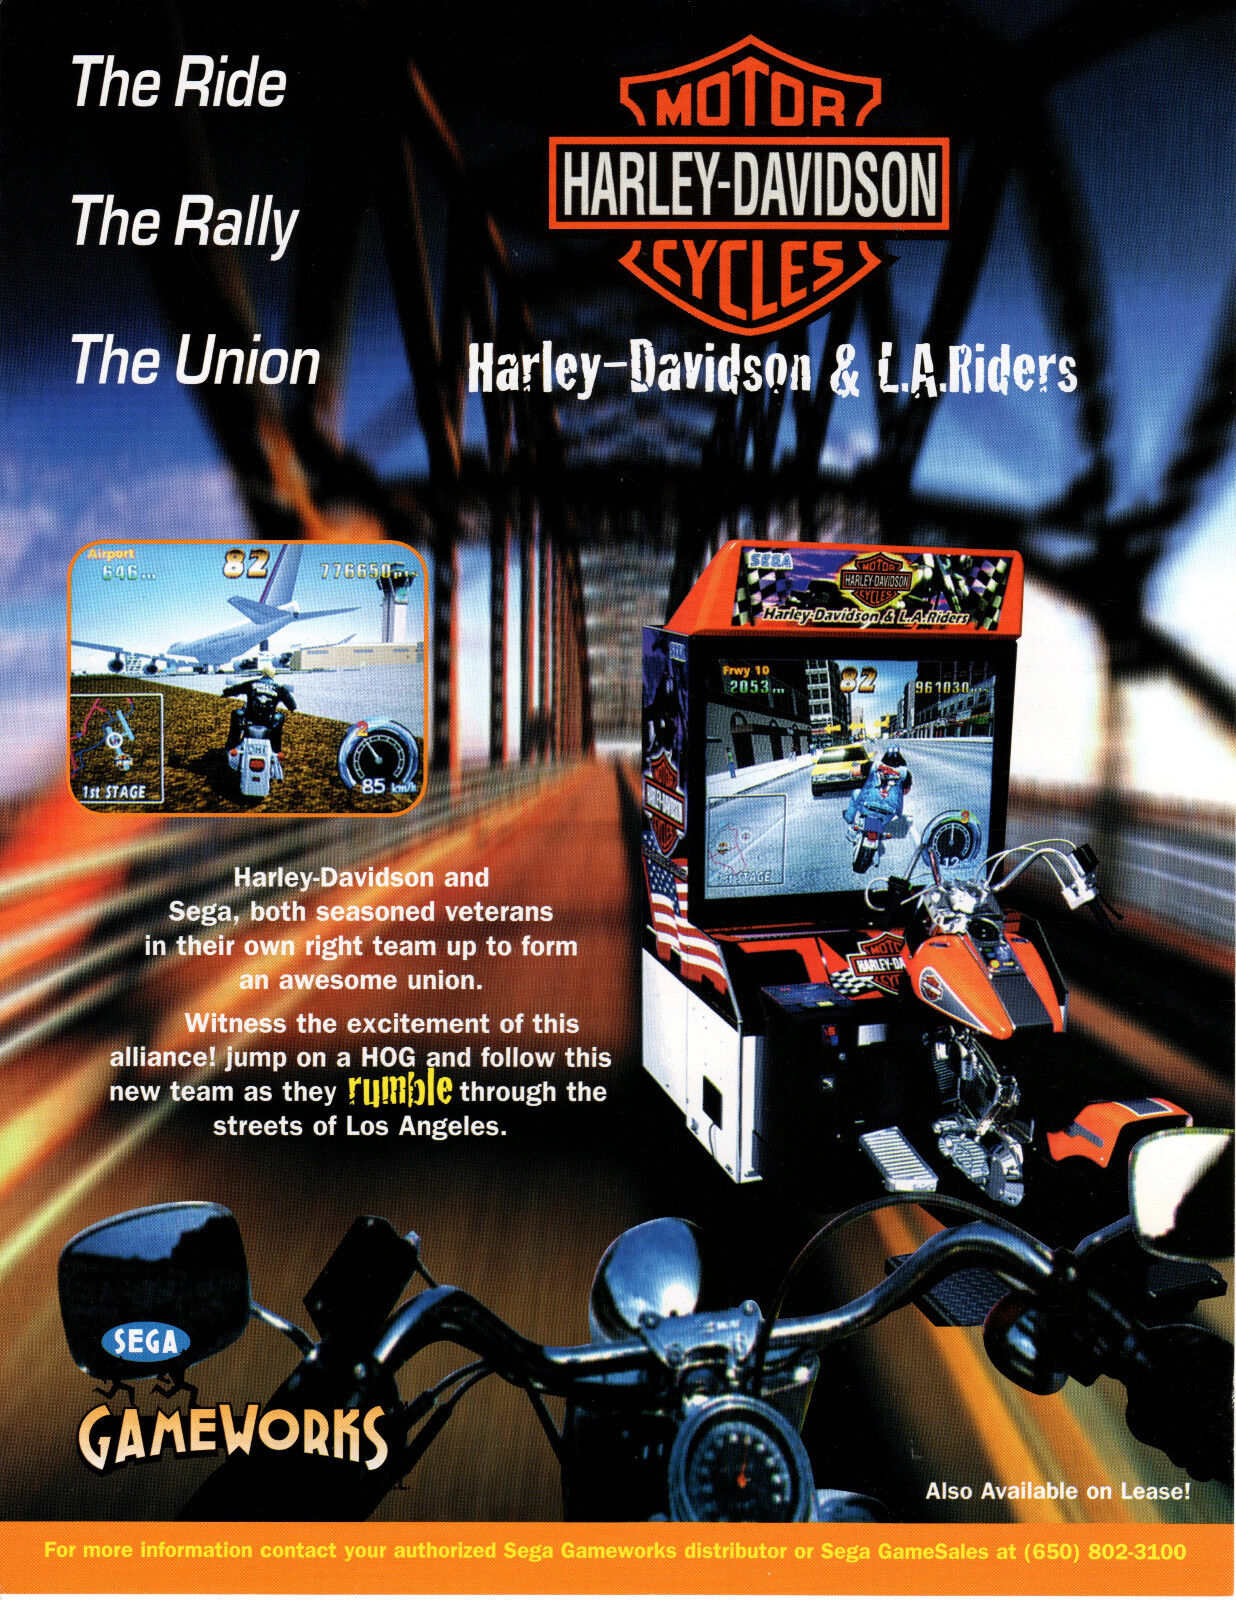 Harley-Davidson and L.A. Riders